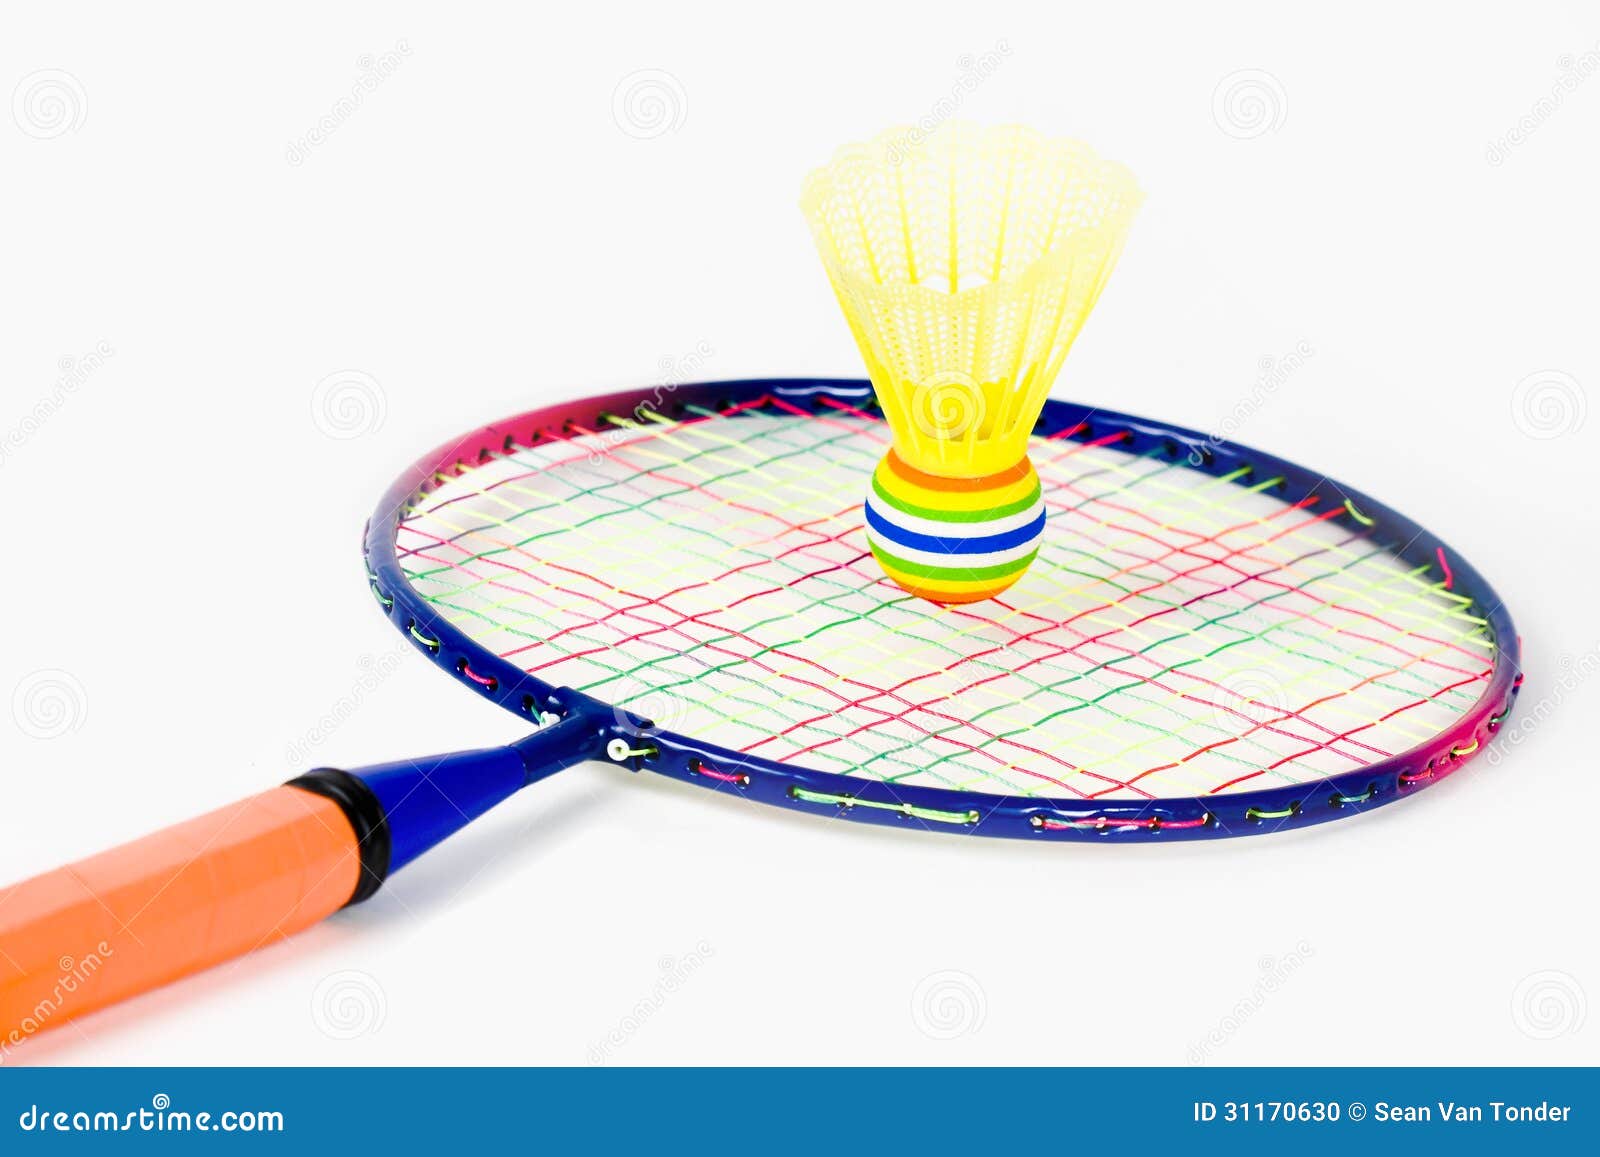 Colorful Badminton Racket and Shuttlecock Stock Photo - Image of contrasts,  shiny: 31170630